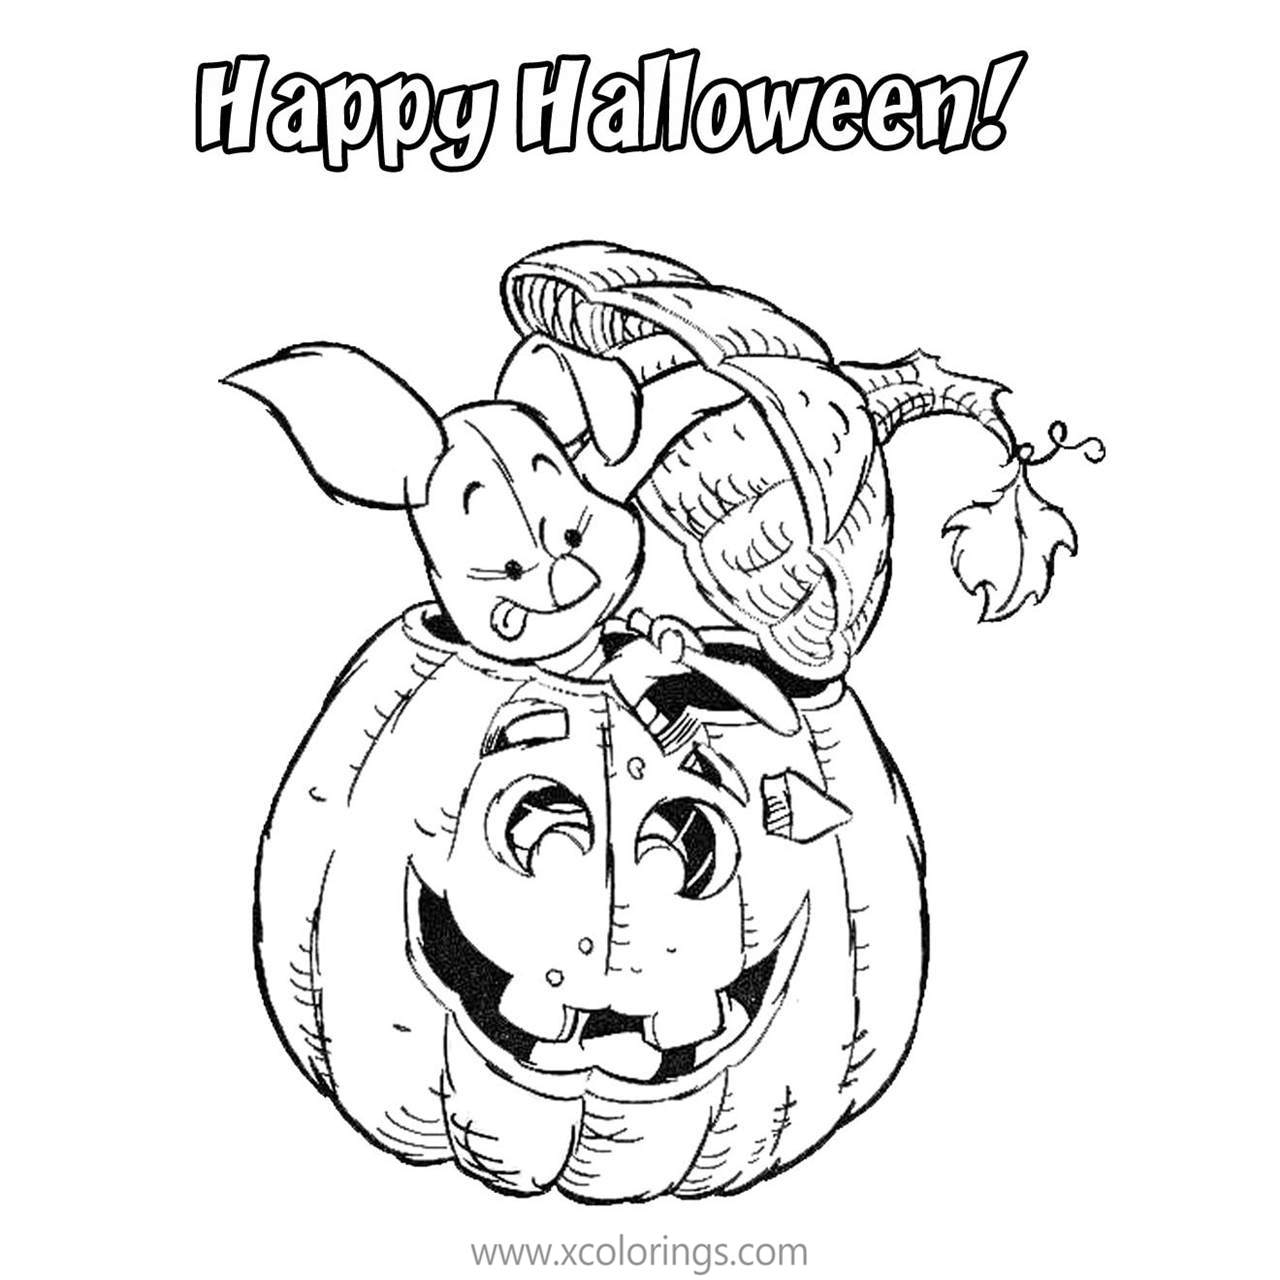 Free Winnie the Pooh Halloween Coloring Pages Piglet in the Jack o Lantern printable